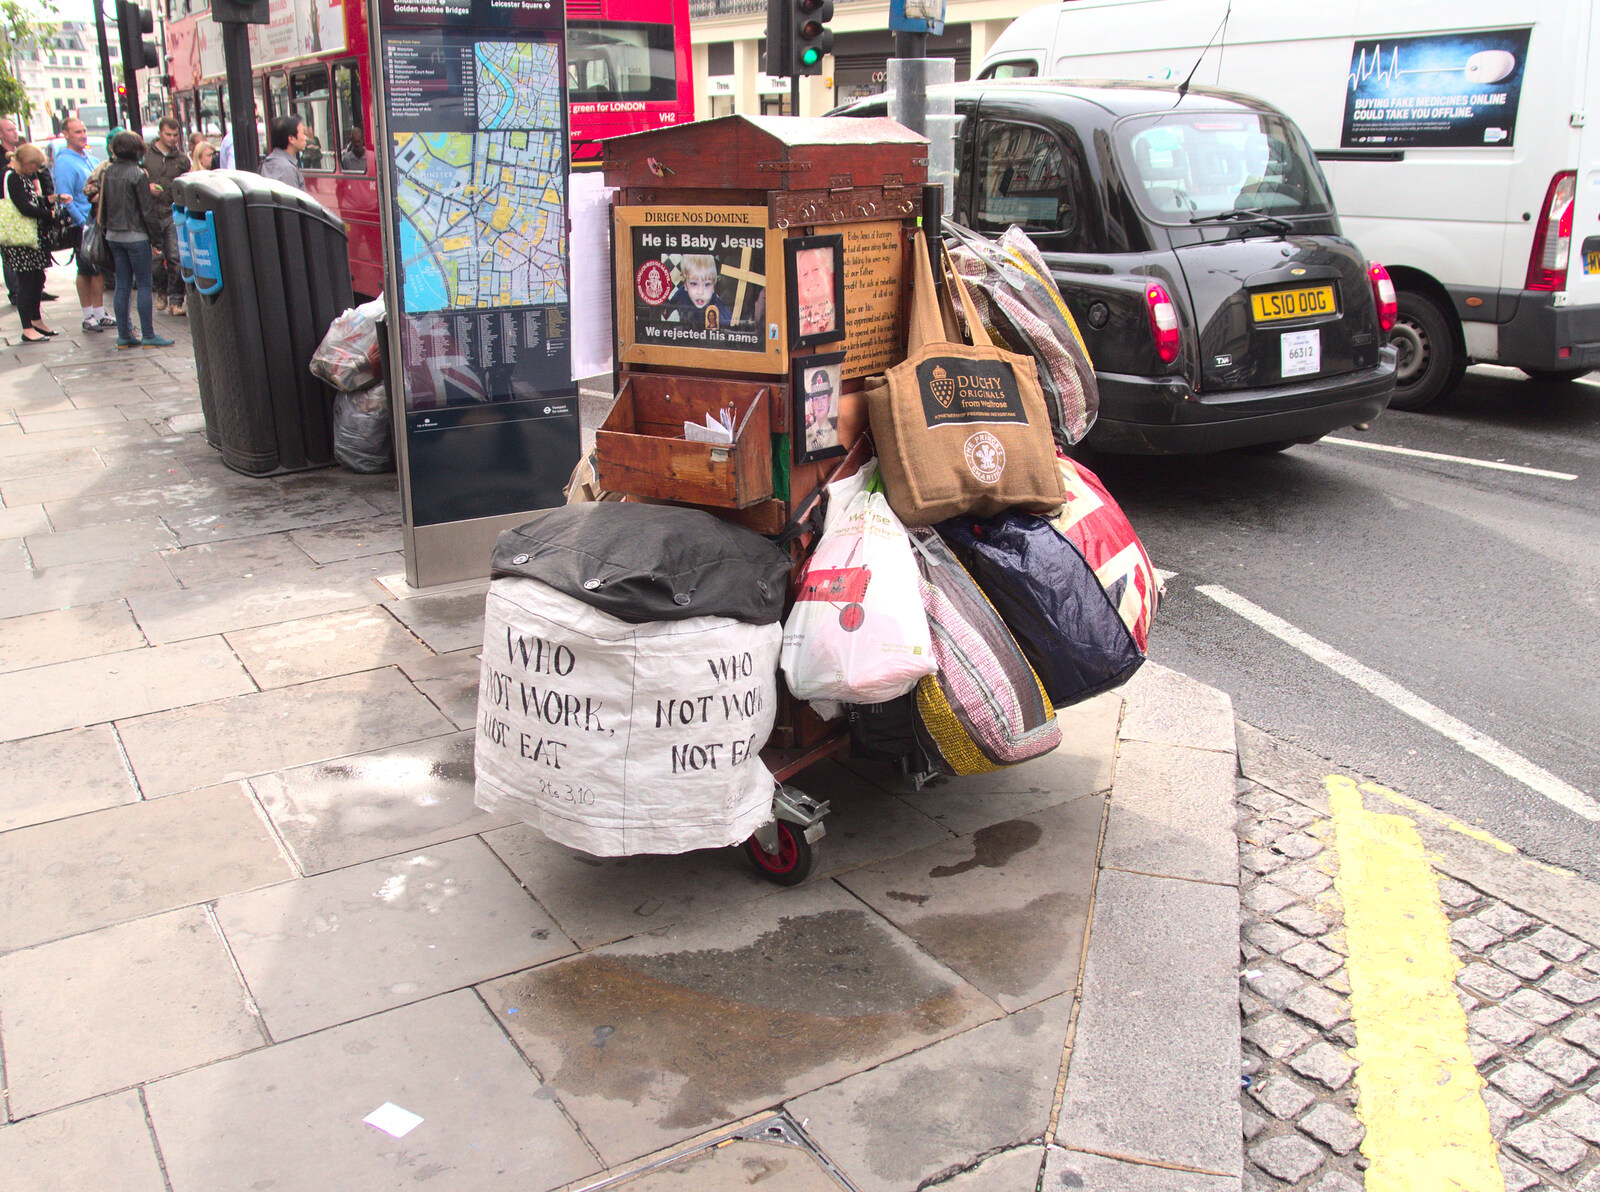 A mobile pulpit and life in bags from SwiftKey Innovation Day, and Pizza Pub, Westminster and Southwark - 14th August 2014